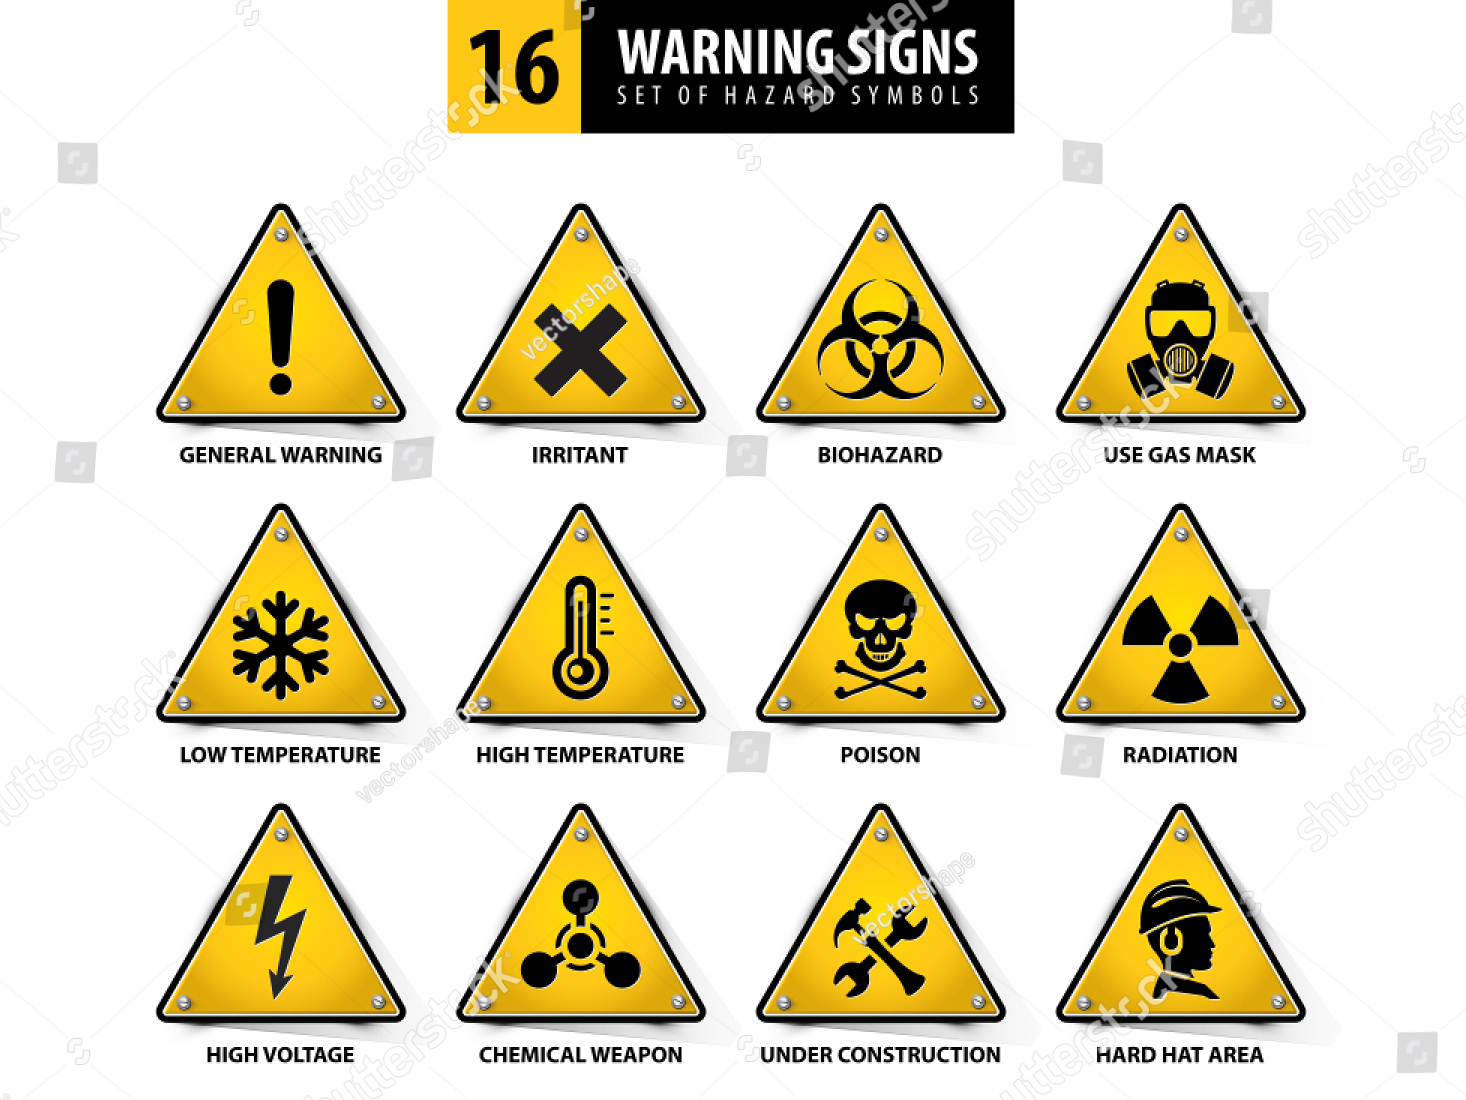 Danger Symbols And Meanings